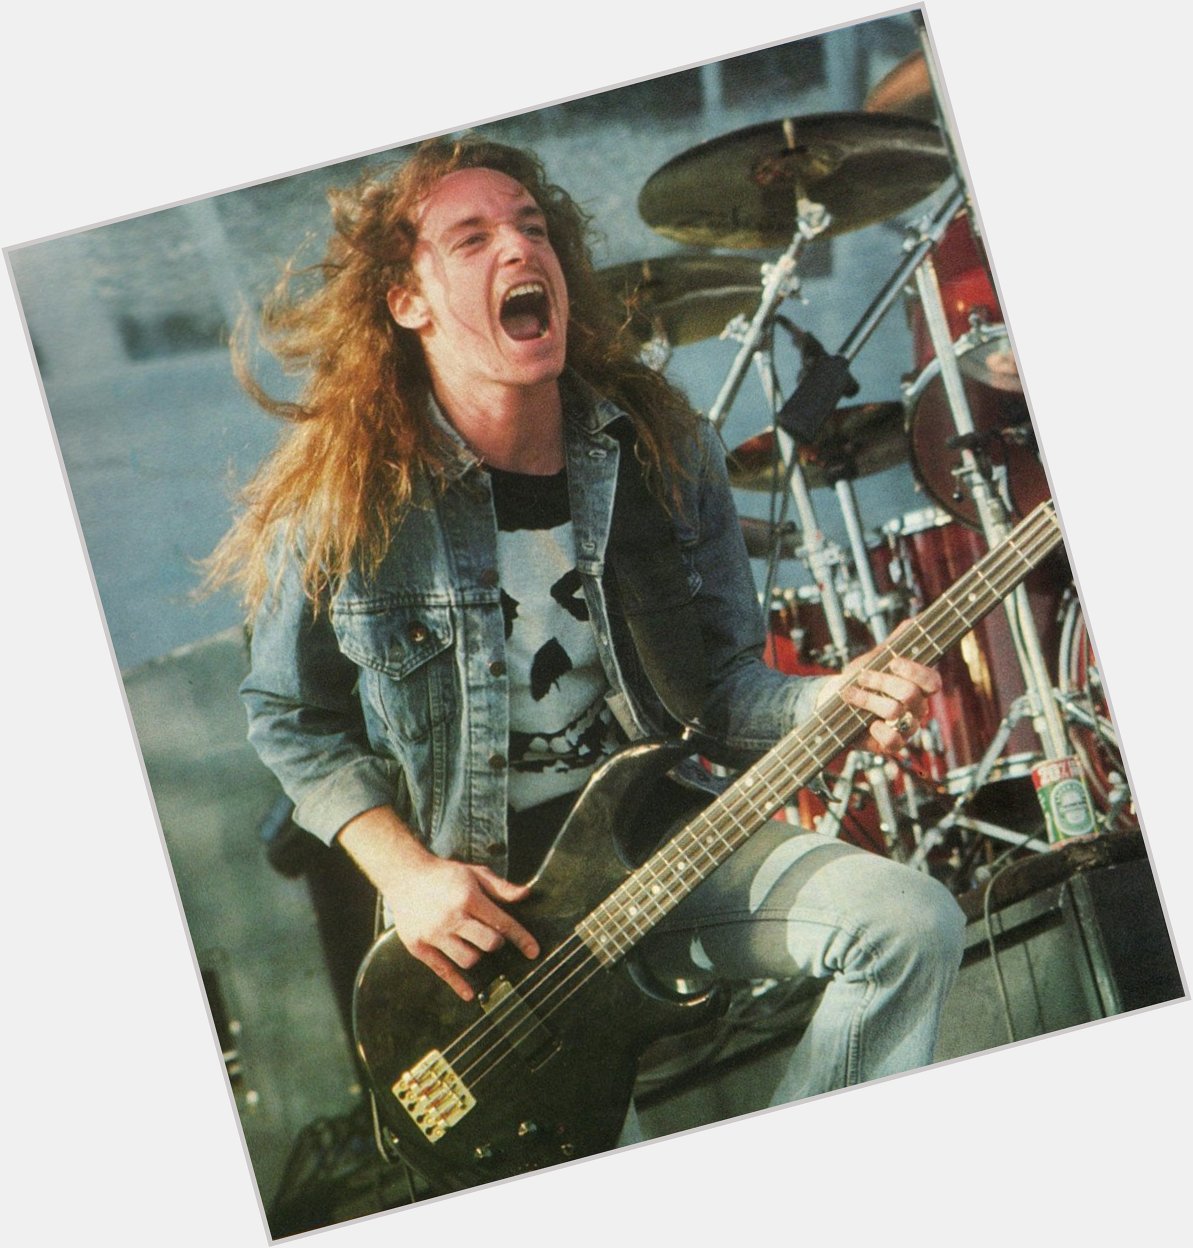 Happy Birthday today to the late Cliff Burton. 